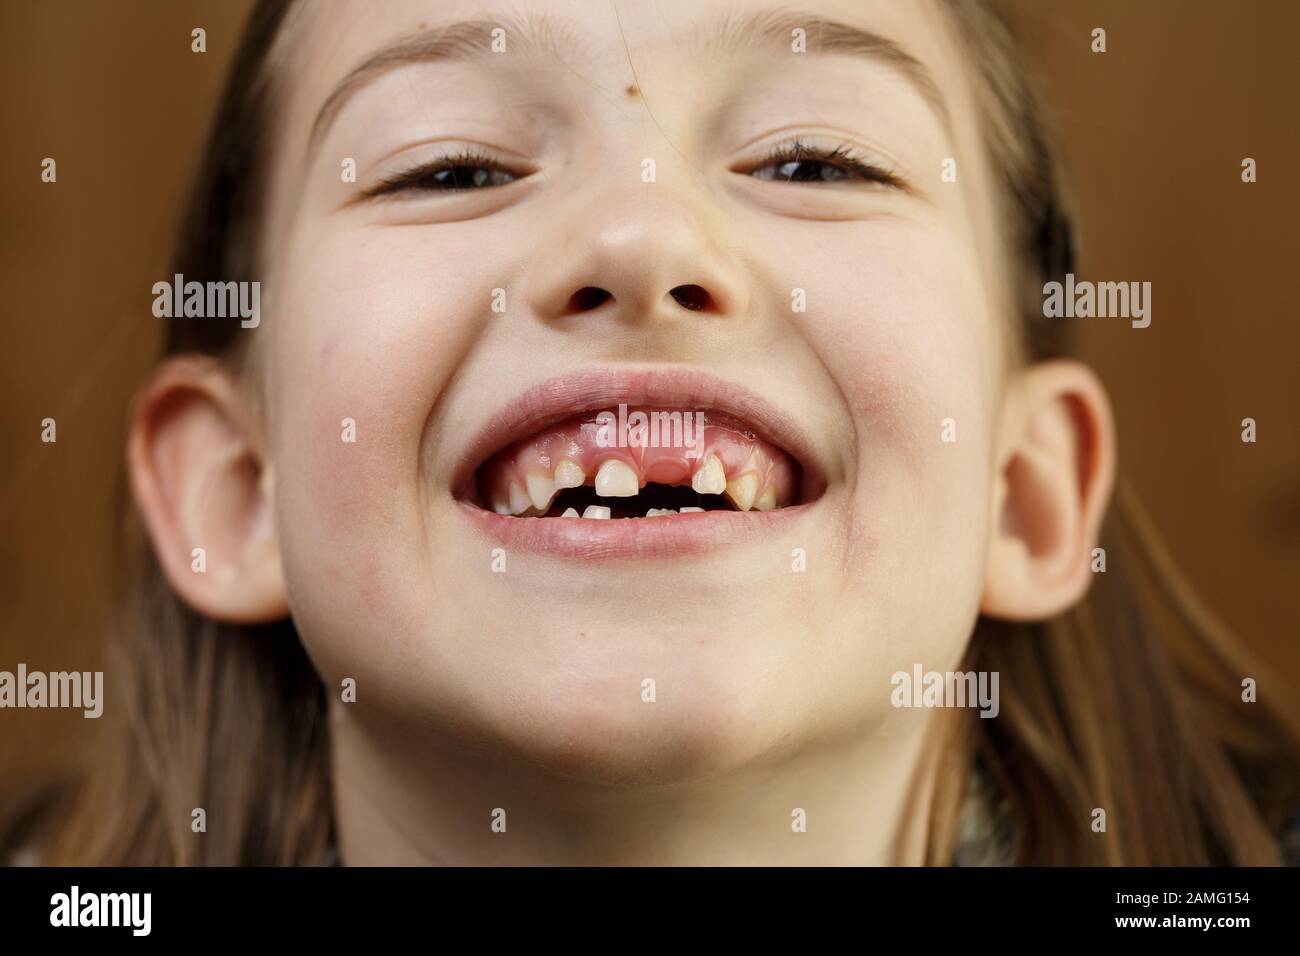 Little girl making faces, smiling, showing her loose and missing milk teeth. Playful, cheerful childhood, tooth fairy, growth and milestone concept. Stock Photo